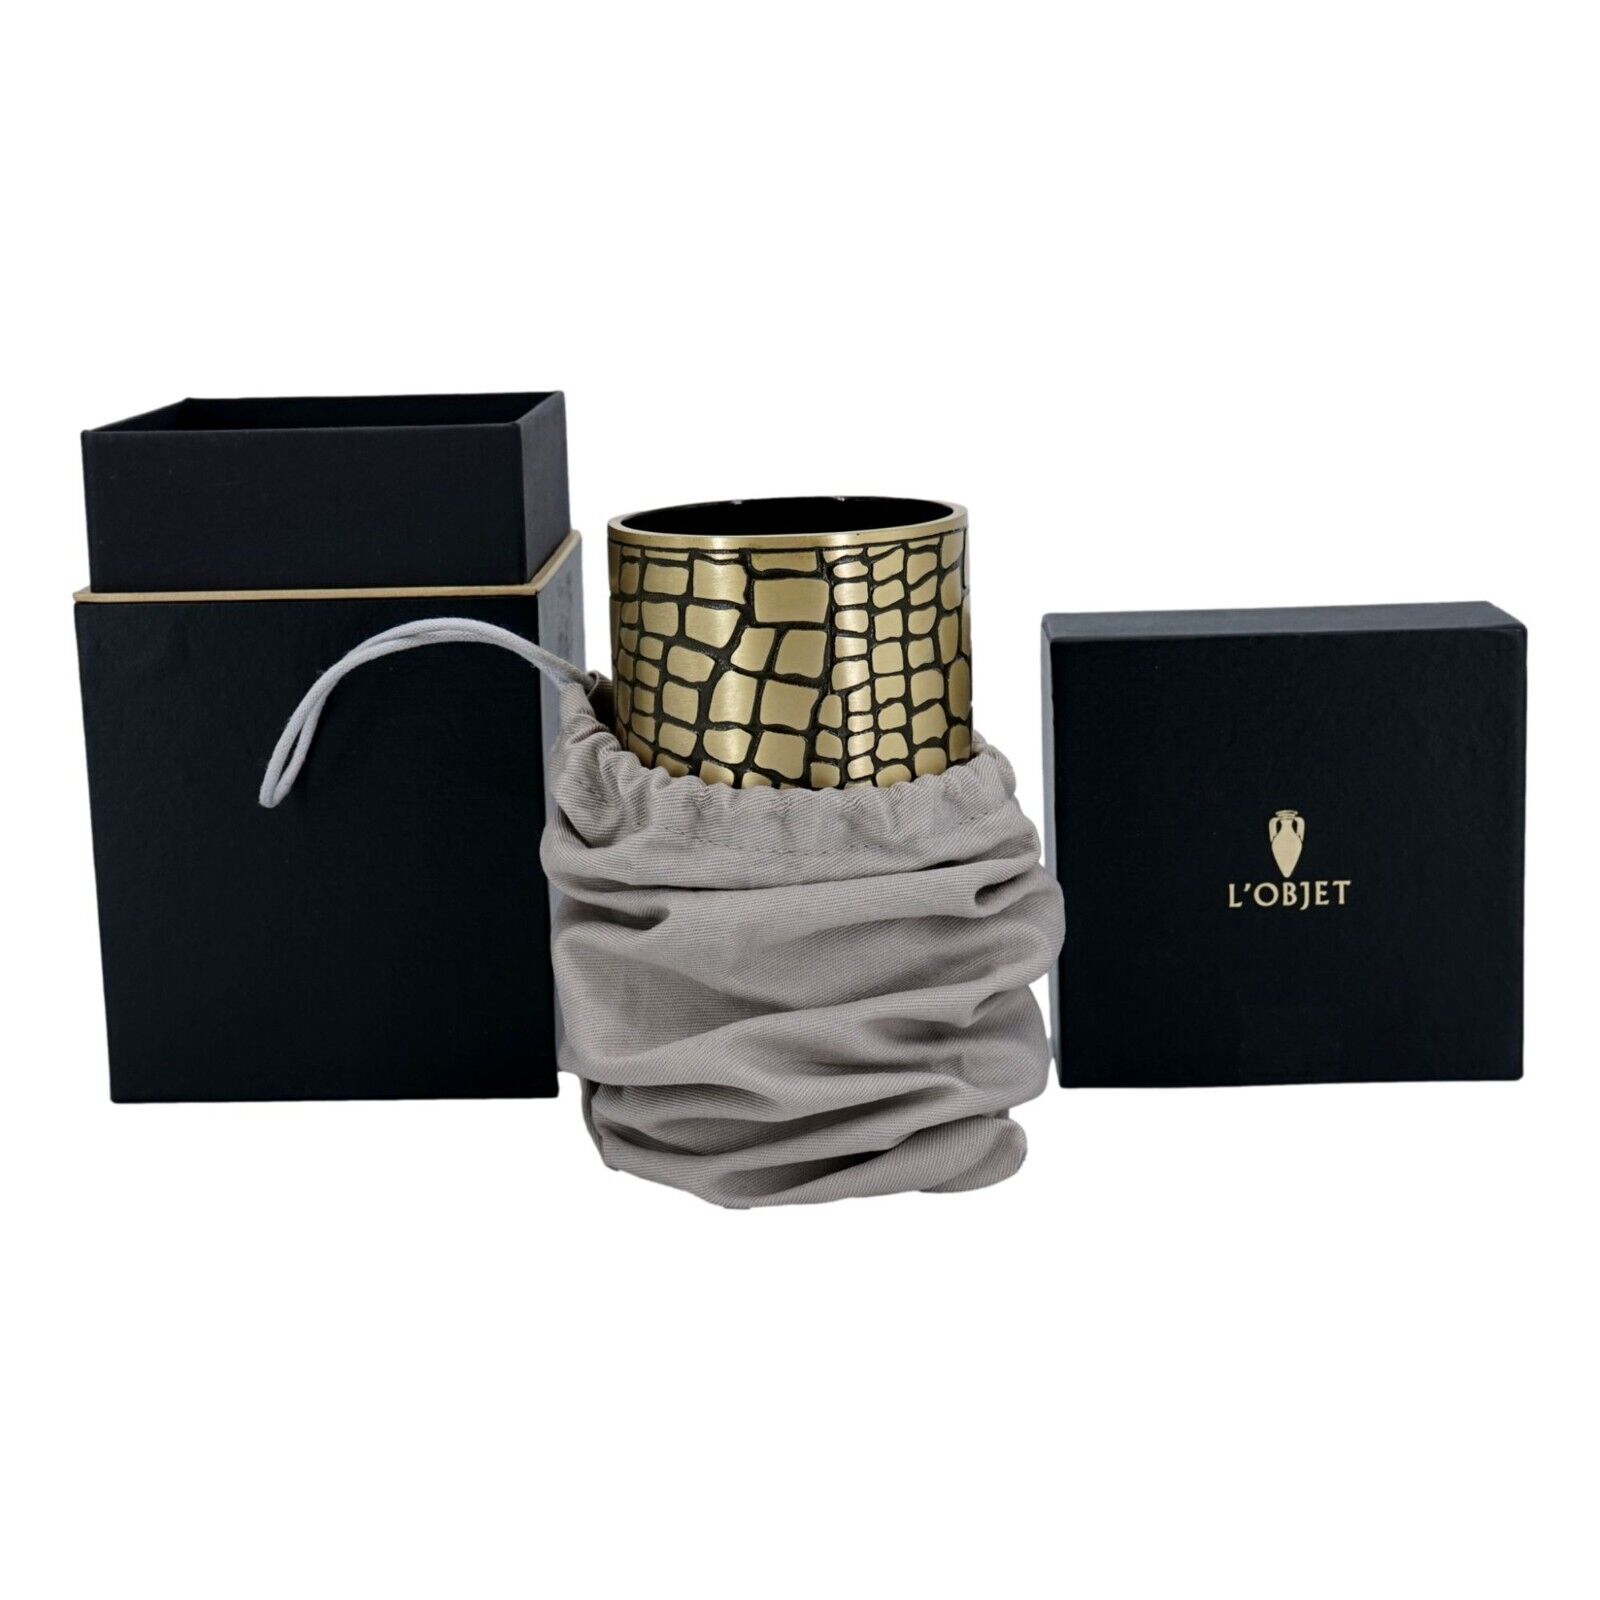 L'Objet Crocodile Black and Gold Brass Vase with Box and Dust Bag